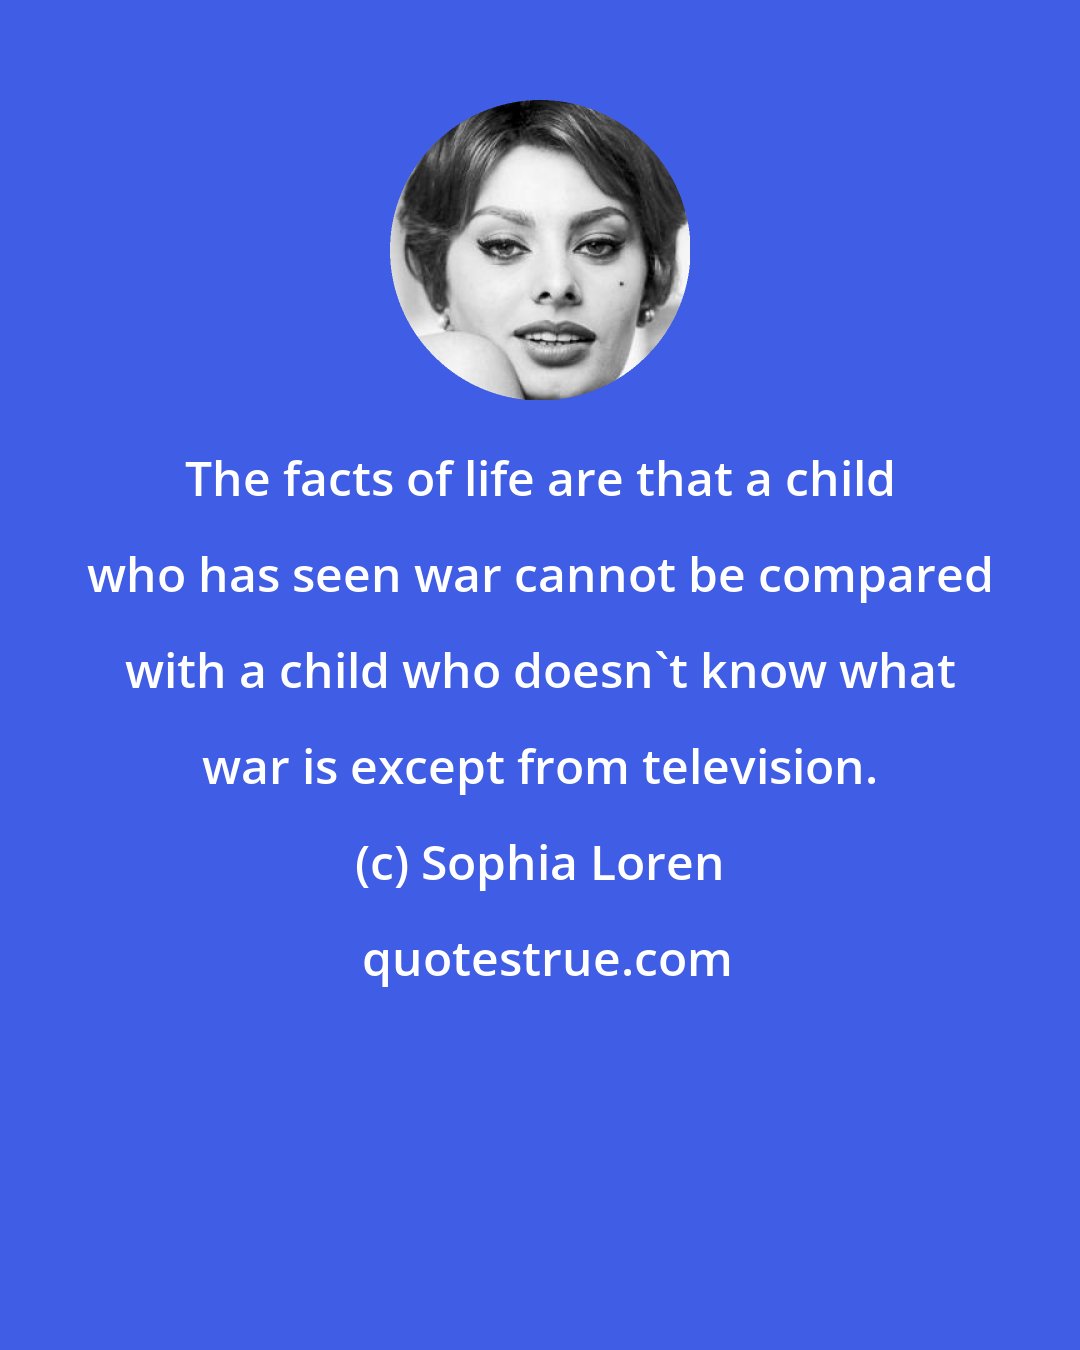 Sophia Loren: The facts of life are that a child who has seen war cannot be compared with a child who doesn't know what war is except from television.